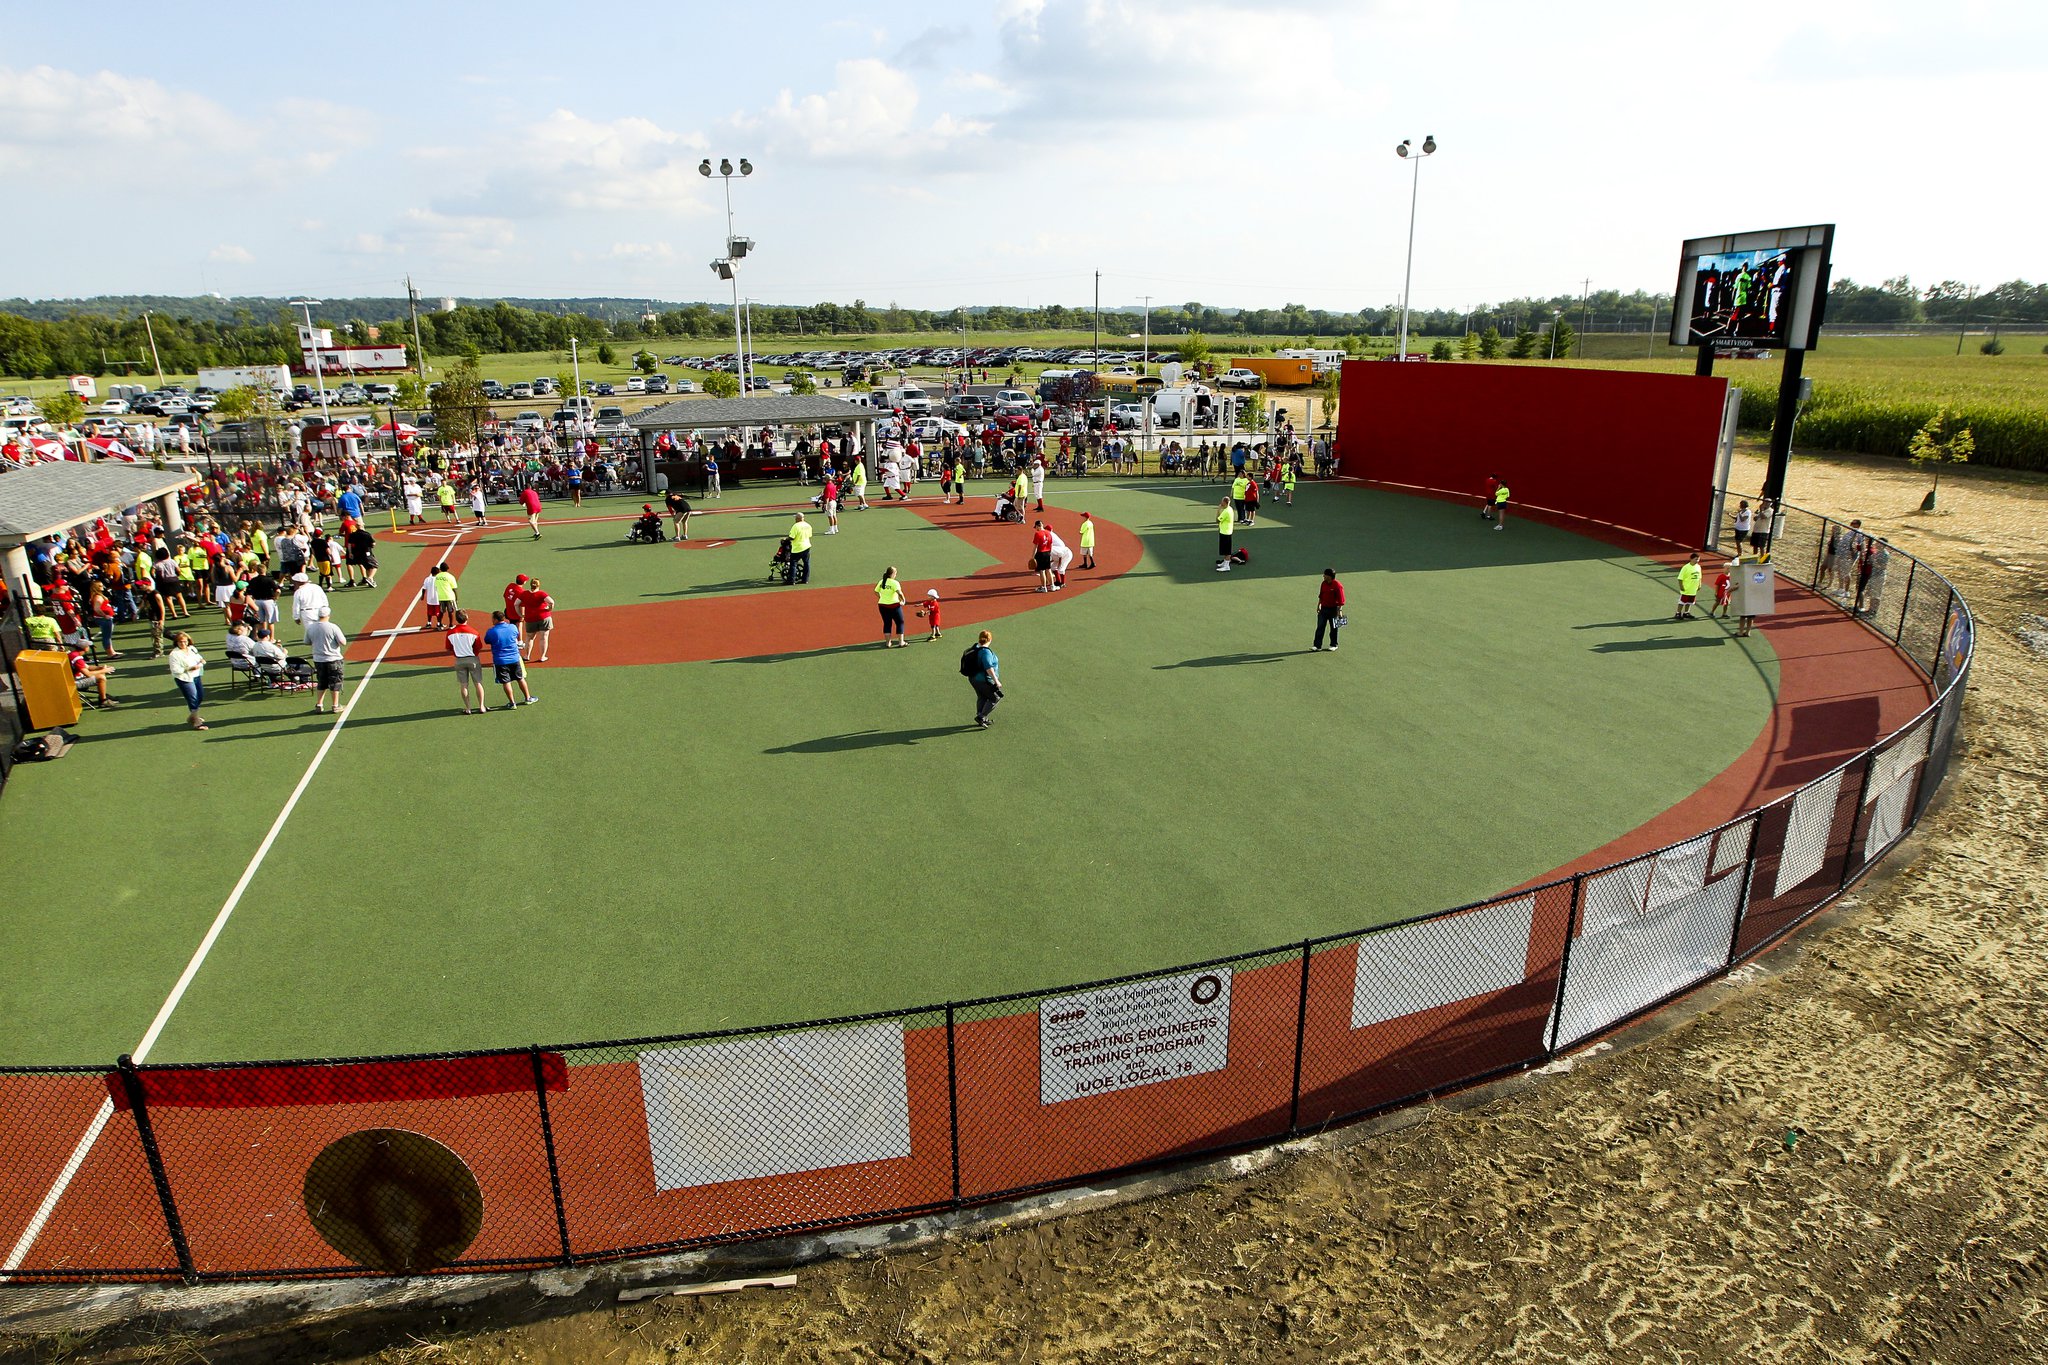 The Joe Nuxhall Miracle League Fields